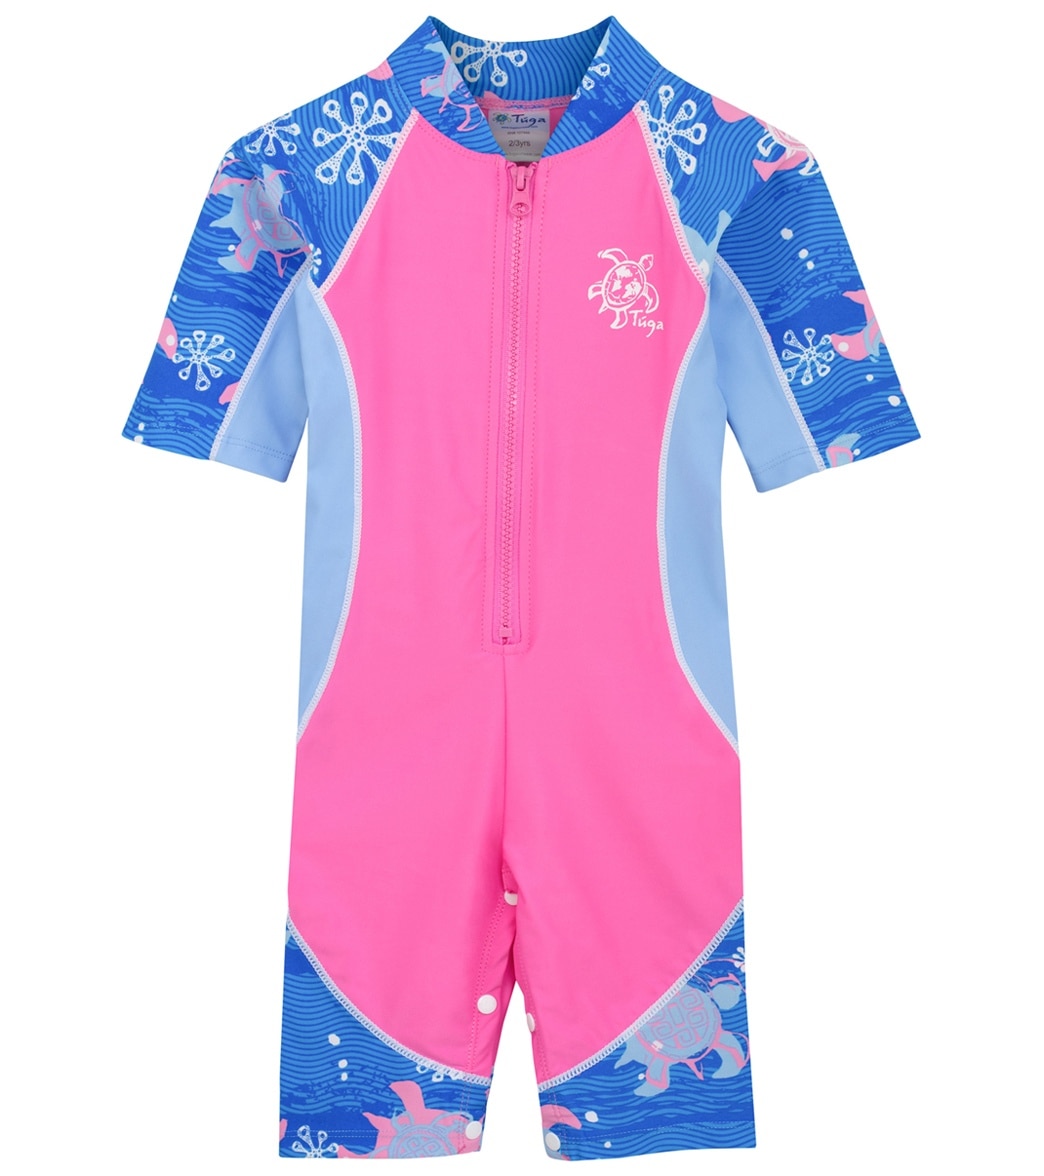 Tuga Girls Low Tide Short Sleeve Sunsuit Baby Toddler - Pink Wave 6/12 Mo Size Months - Swimoutlet.com